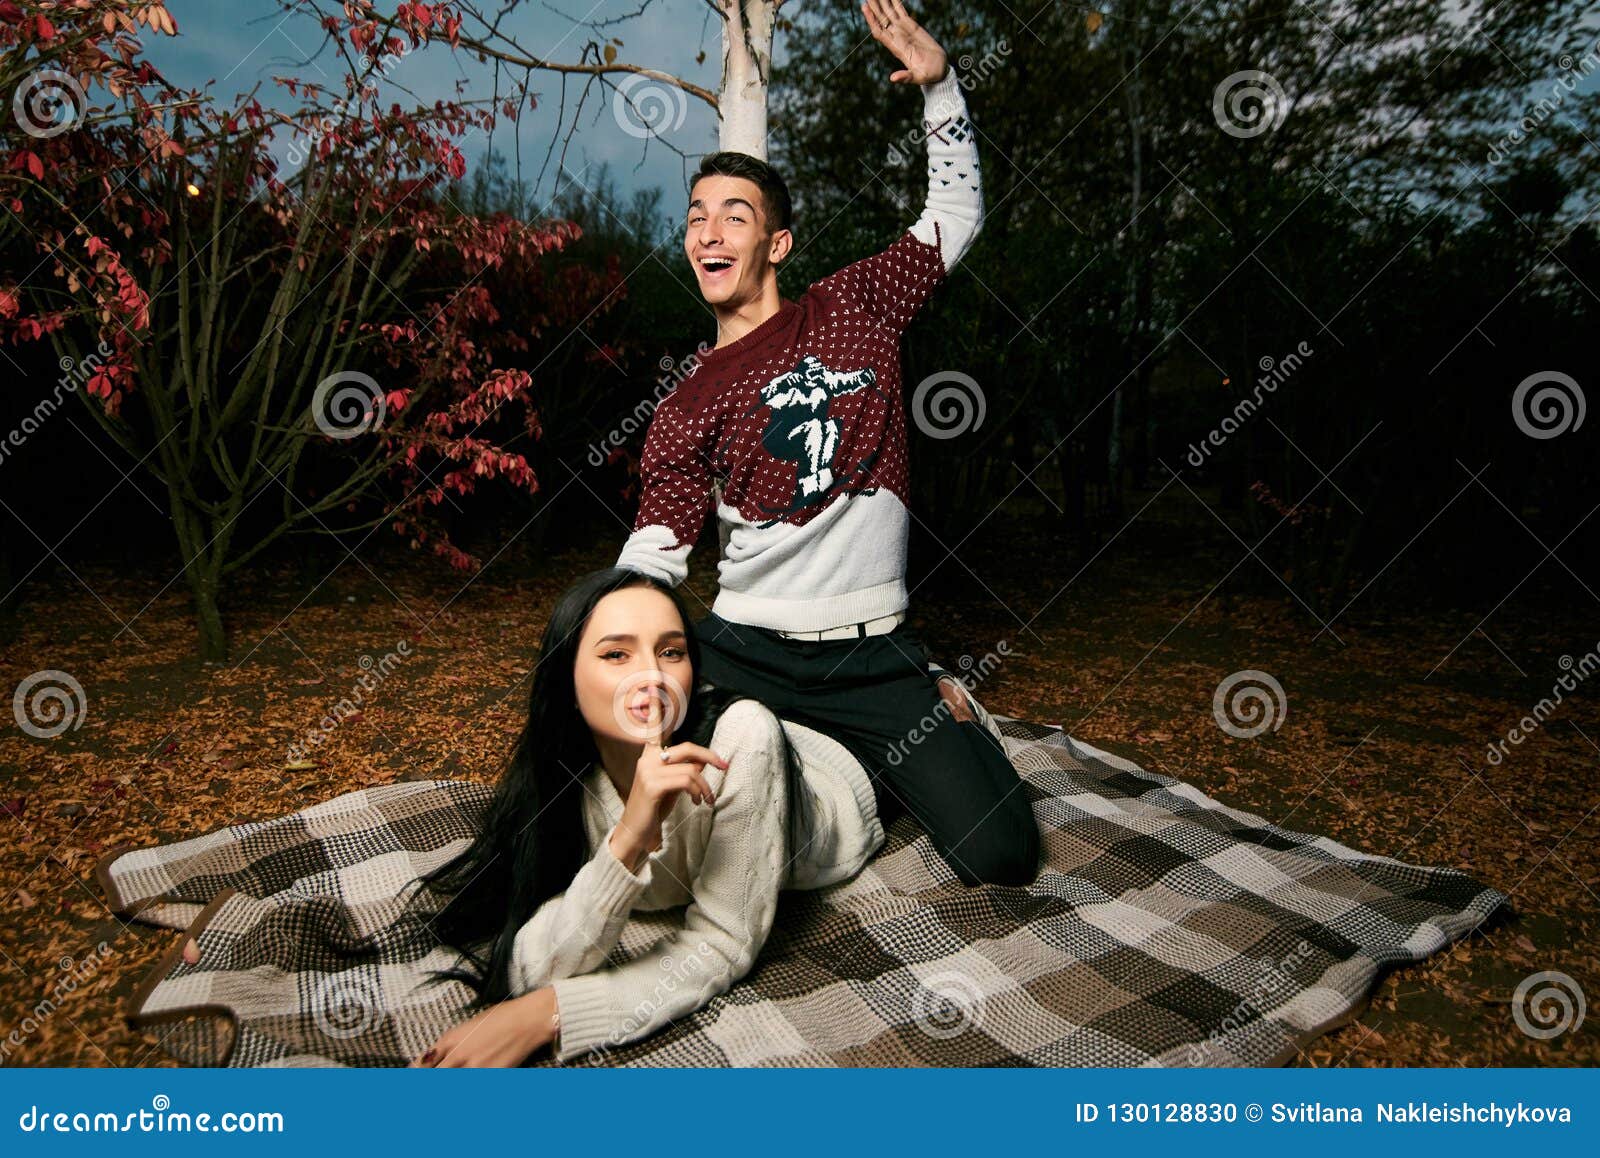 guy in a red and white sweater sits on top of a beautiful girl w